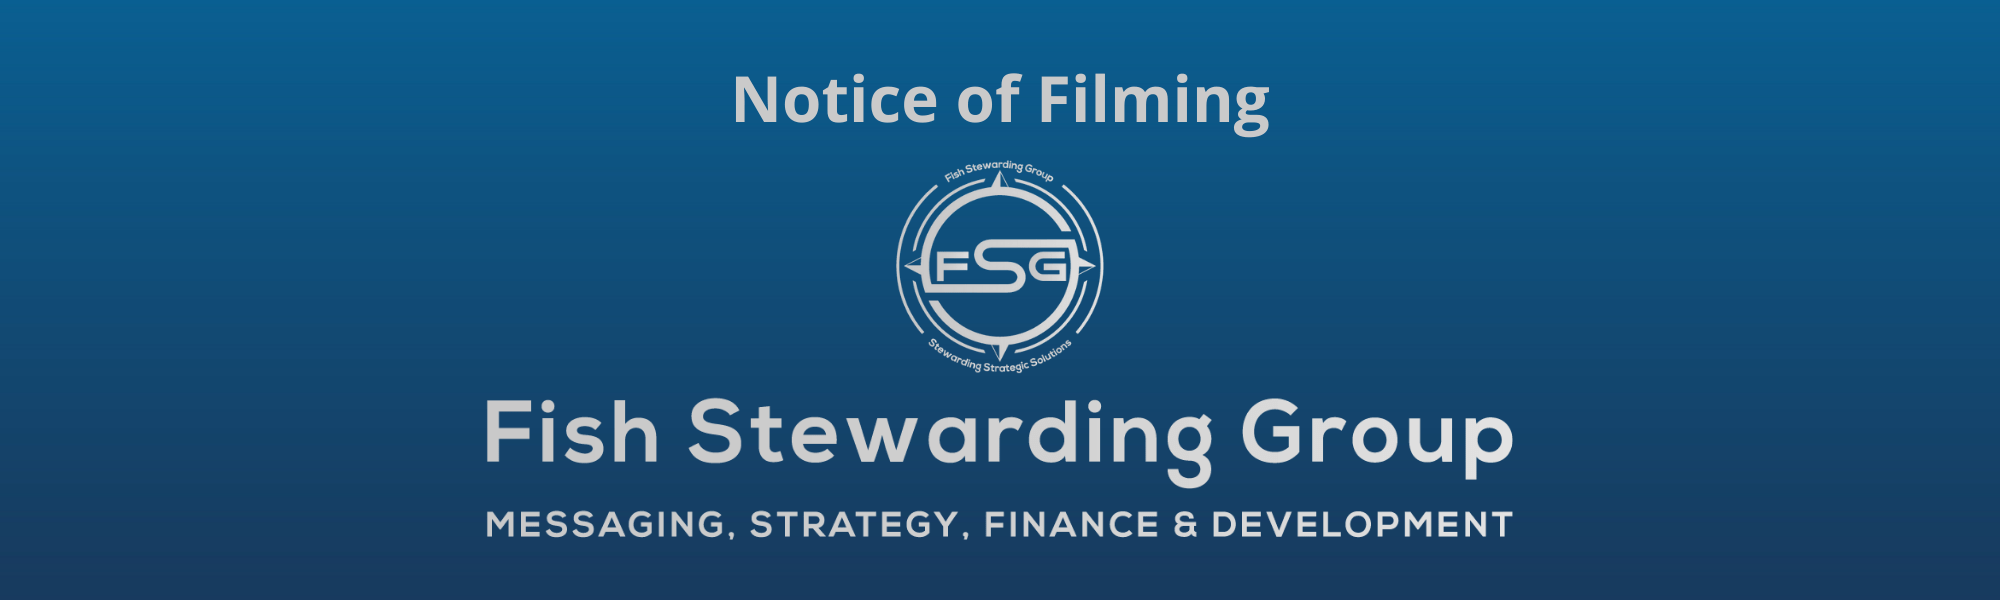 A thin rectangular Footer graphic for the Notice of Filming page. The background is a blue gradient color that goes from a dark blue on the bottom to a lighter blue on top. The text in gray on top reads Notice of Filming. The text in gray on the bottom center reads: Fish Stewarding Group and beneath that, the text reads Messaging, Strategy, Finance and Development. In the center above the text is the FSG logo in gray. The logo has the letters FSG in the middle with a circle with four pointed arrows facing north, south, east and west with the S connected to that circle. Four rounded lines make the next circle of the circle and the last layer is a thin circle with the text on the Bottom that reads Stewarding Strategist Solutions and on top, the text reads Fish Stewarding Group.